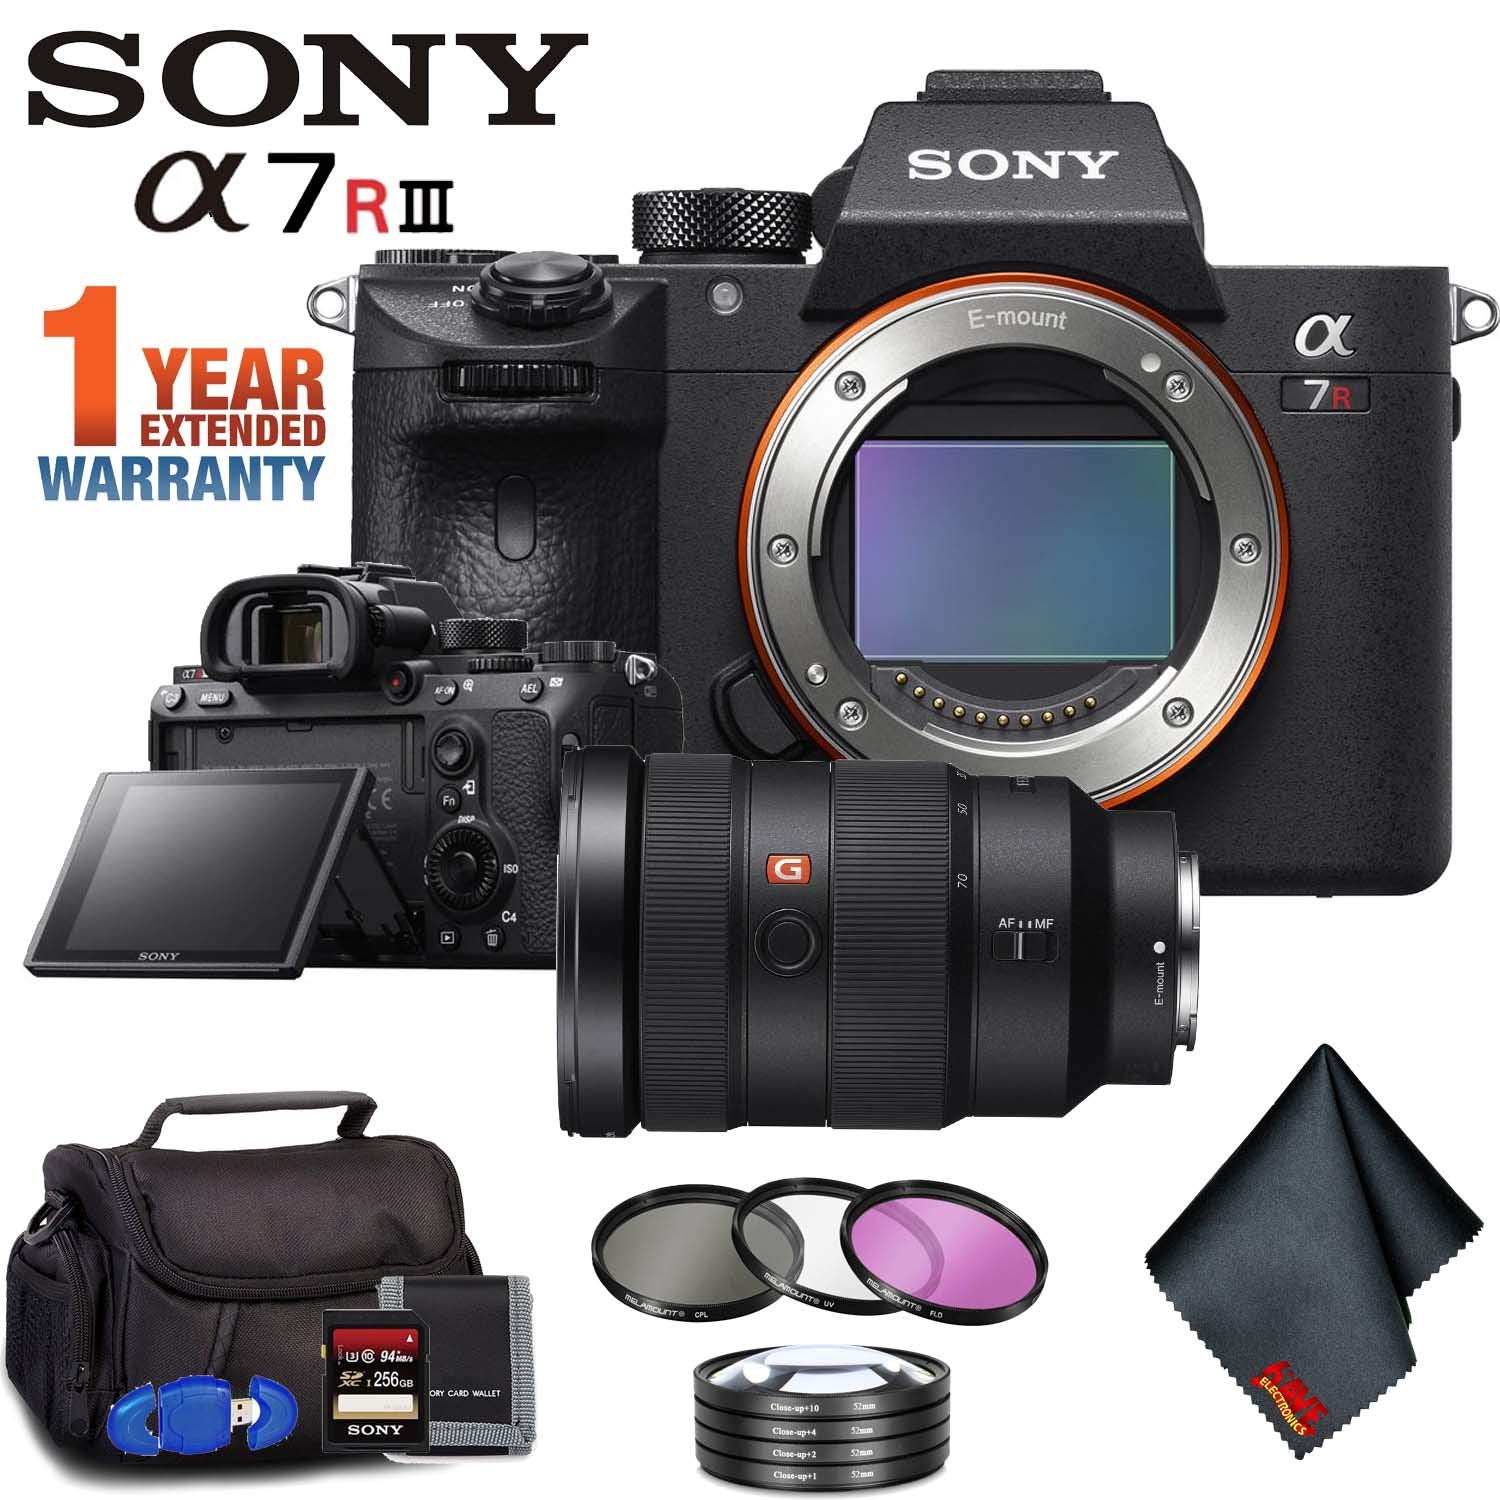 Sony Alpha a7R III Mirrorless Digital Camera (Body Only) + 24-70mm Lens + Filter Kit + Memory Card Kit + Carrying Case Ultimate Bundle